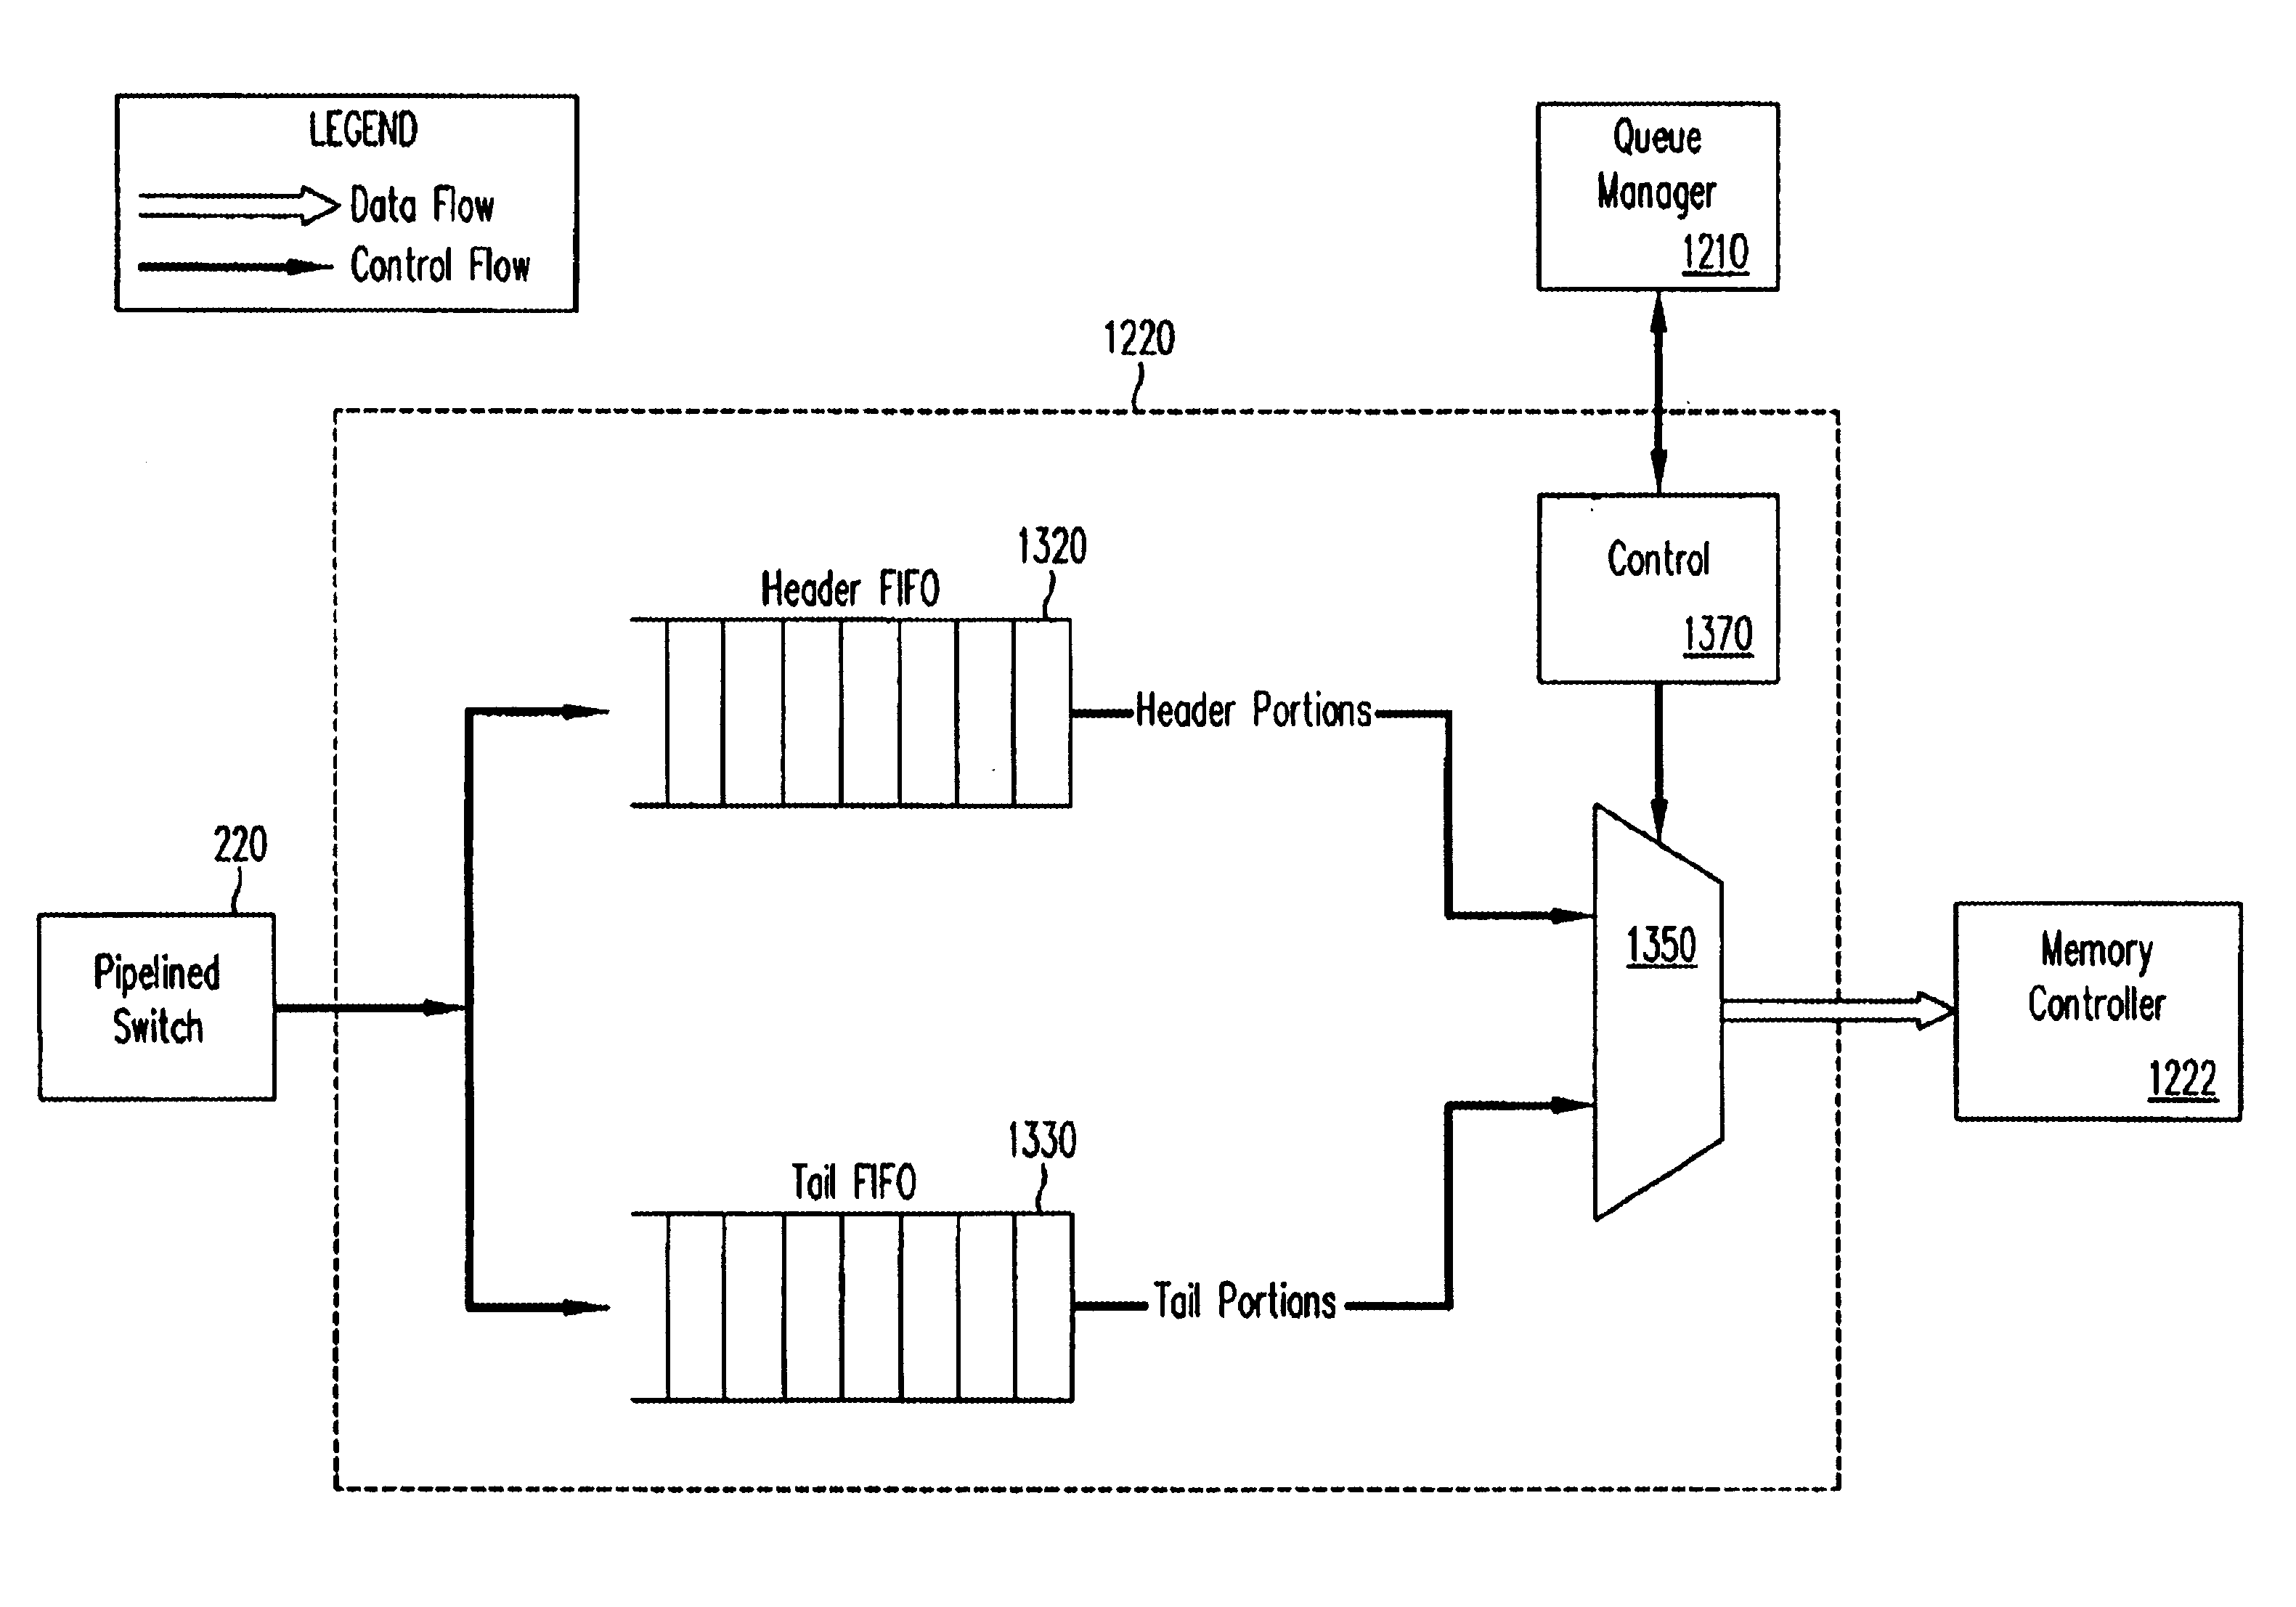 Flexible DMA engine for packet header modification